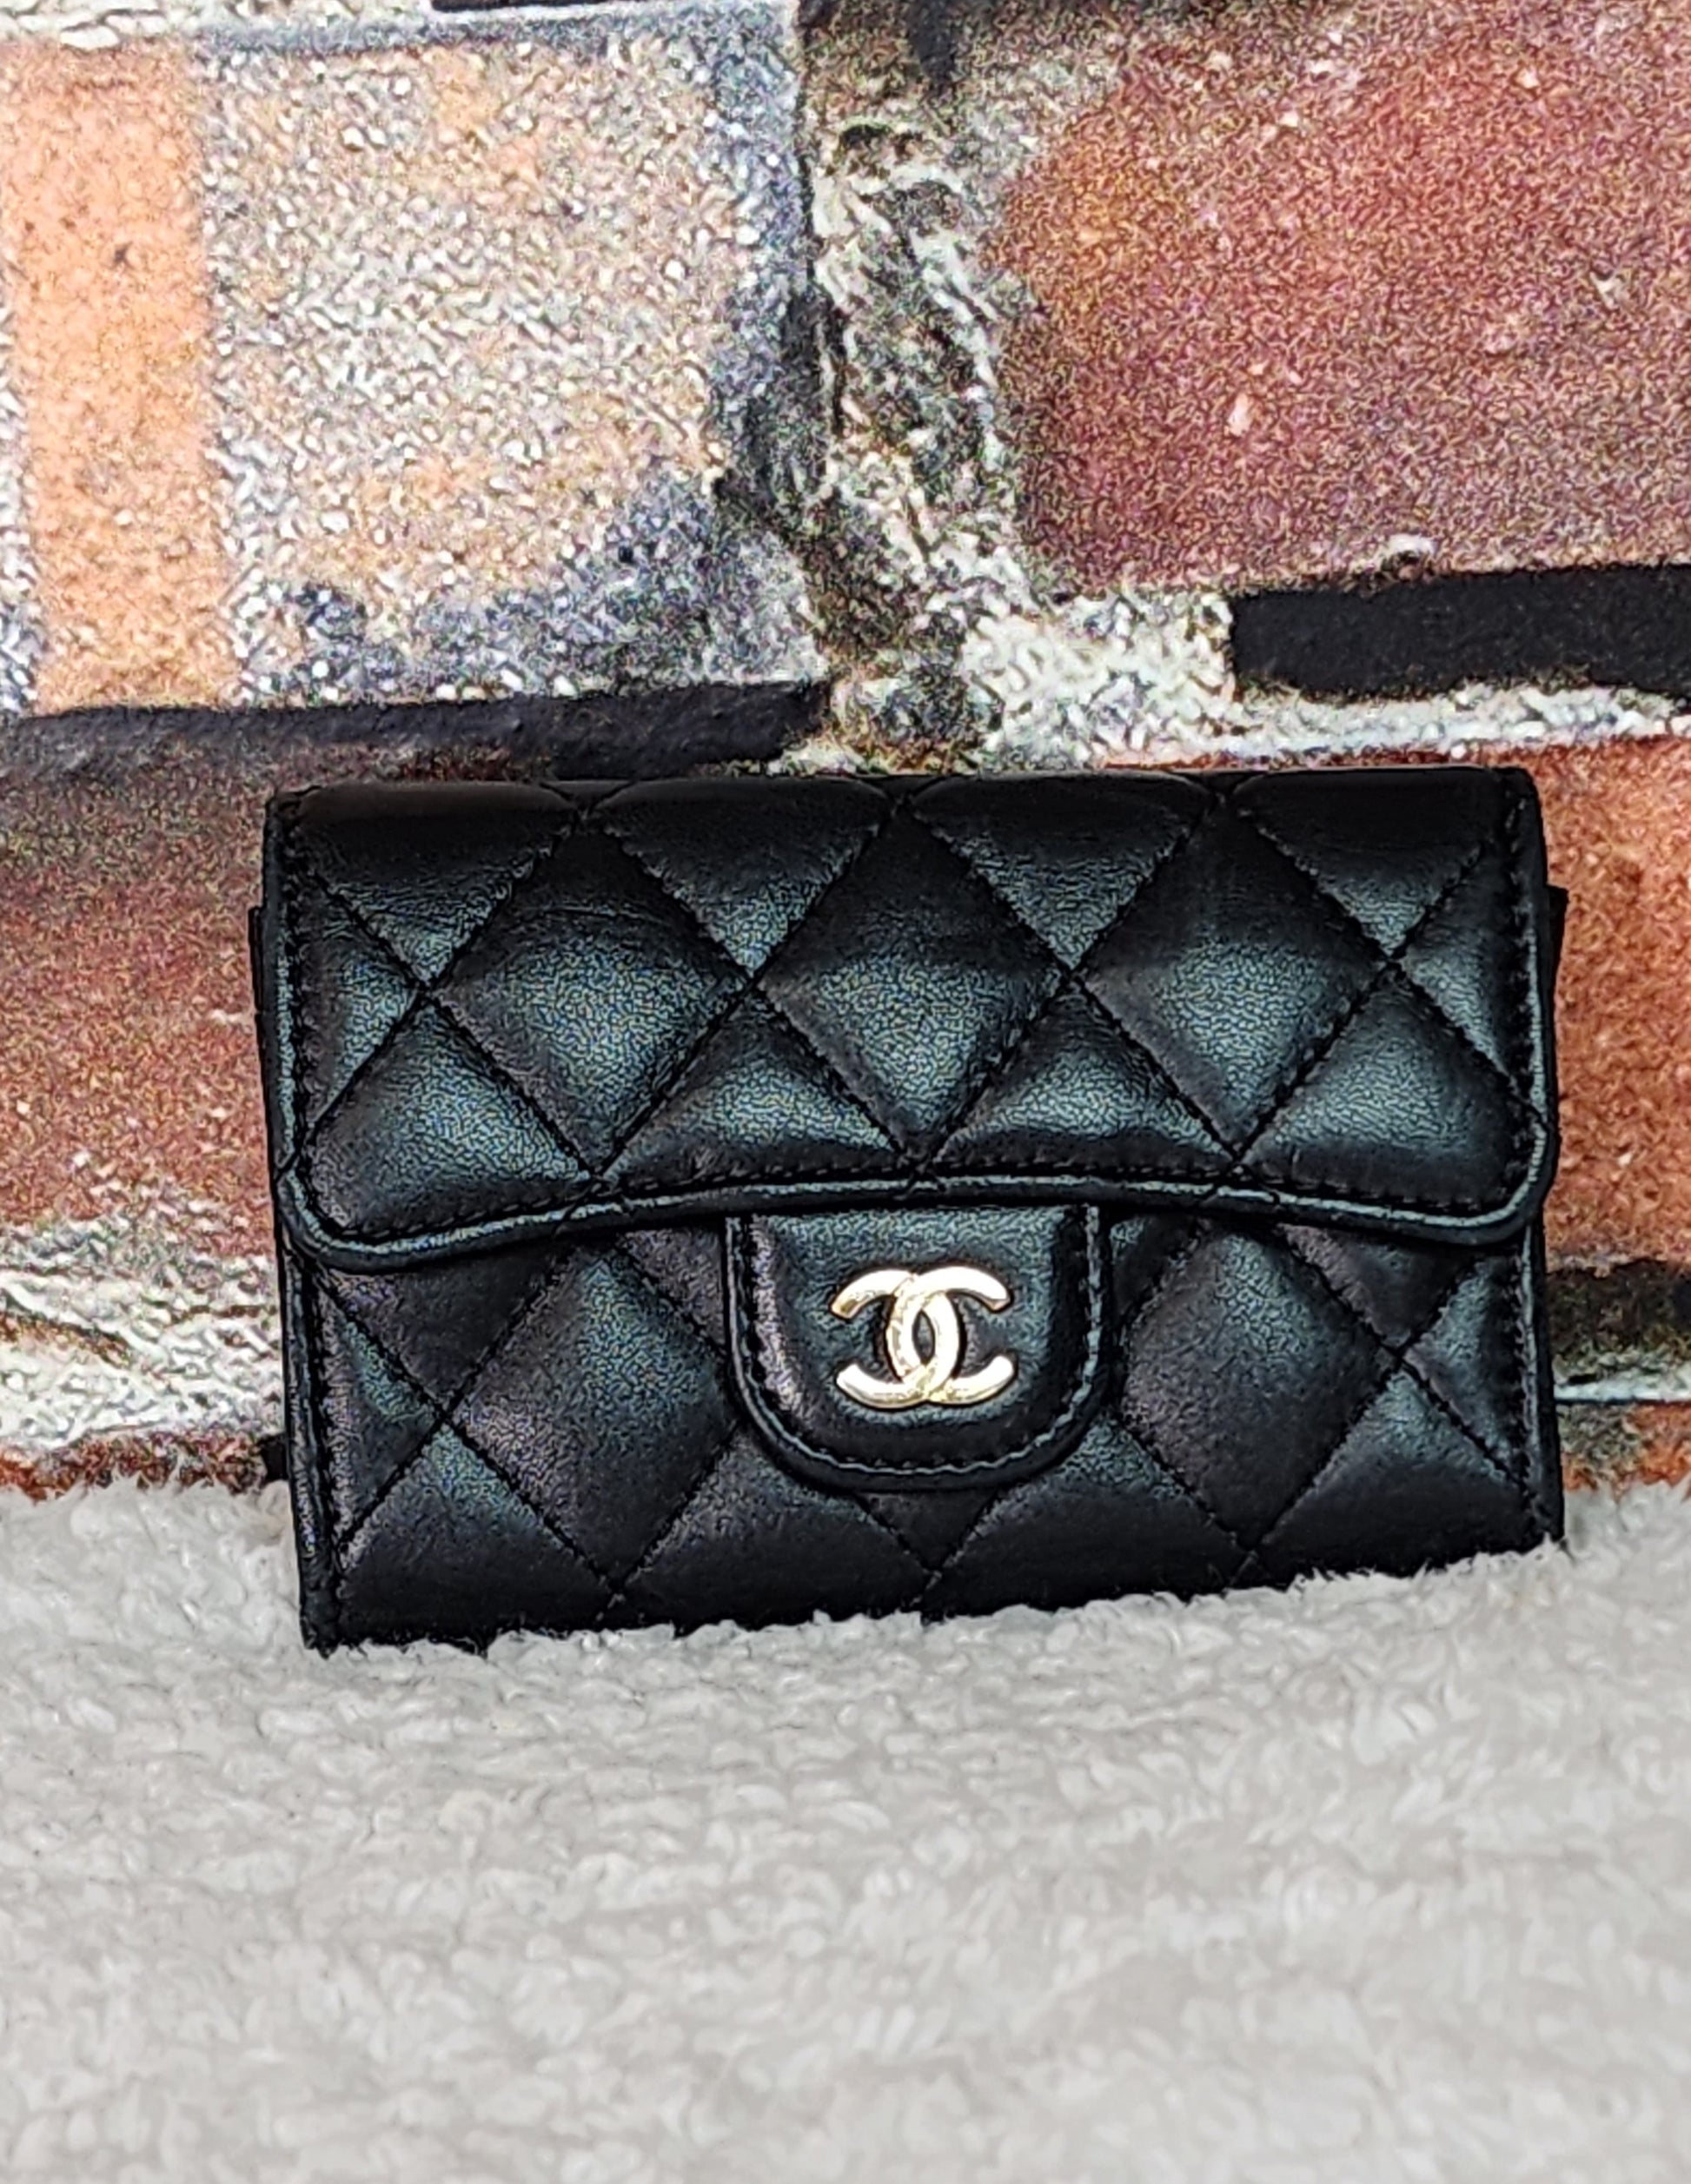 Pre-Loved Chanel Quilted Lambskin Coin Purse – The Sparkling Spur